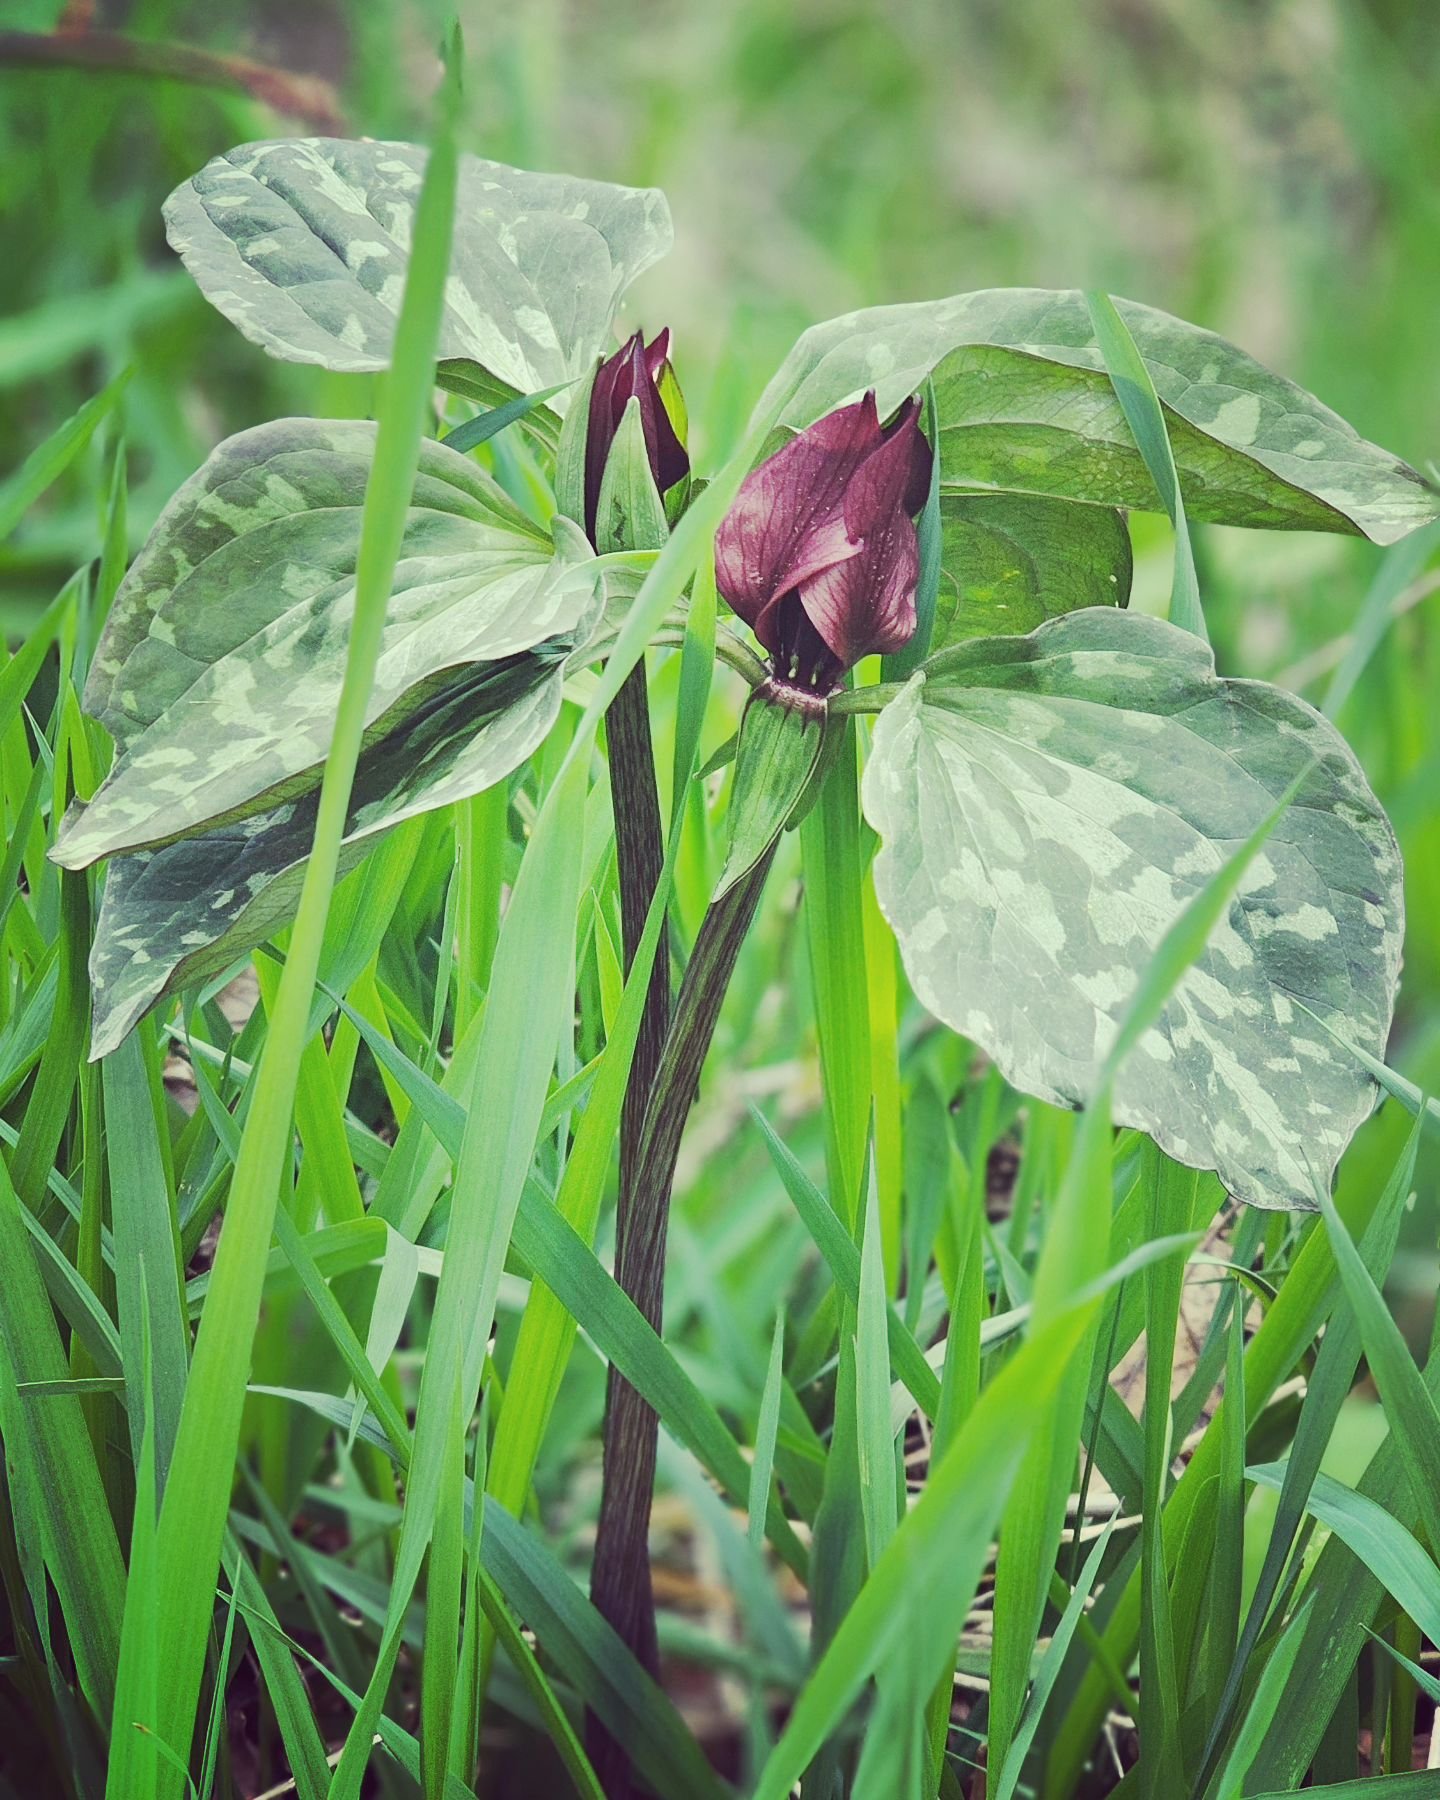 In the garden. Toadshade because to some it resembles a toad-sized umbrella. And because it is one of the first spring flowers of the season, the red trillium is sometimes known as the Wakerobin because it blooms when the first robins make their appe